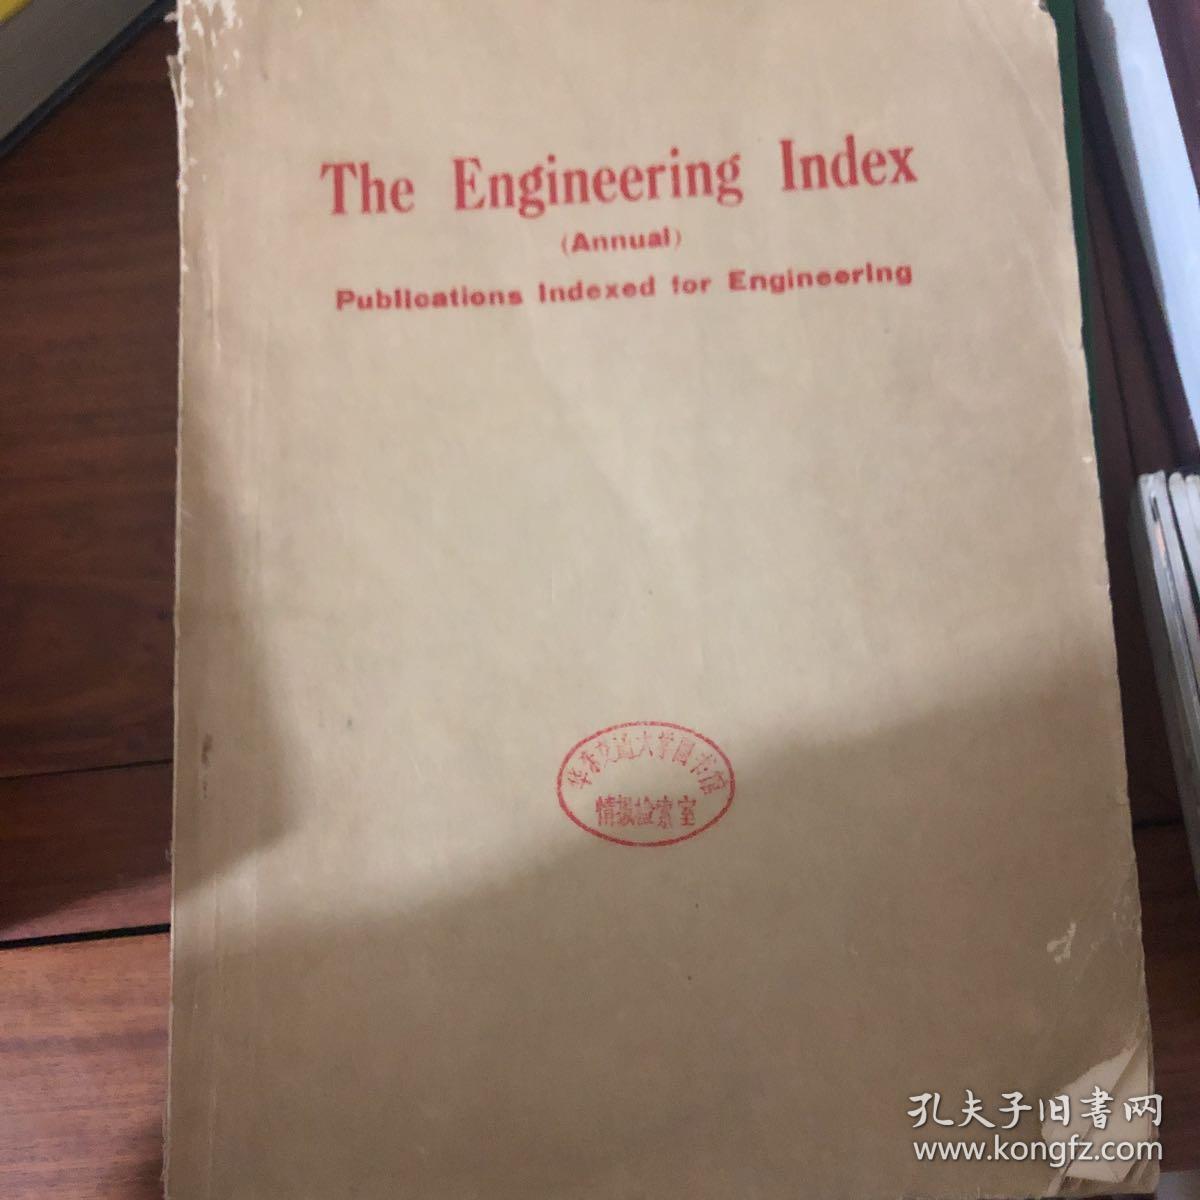 The Engineering Index(Annual)